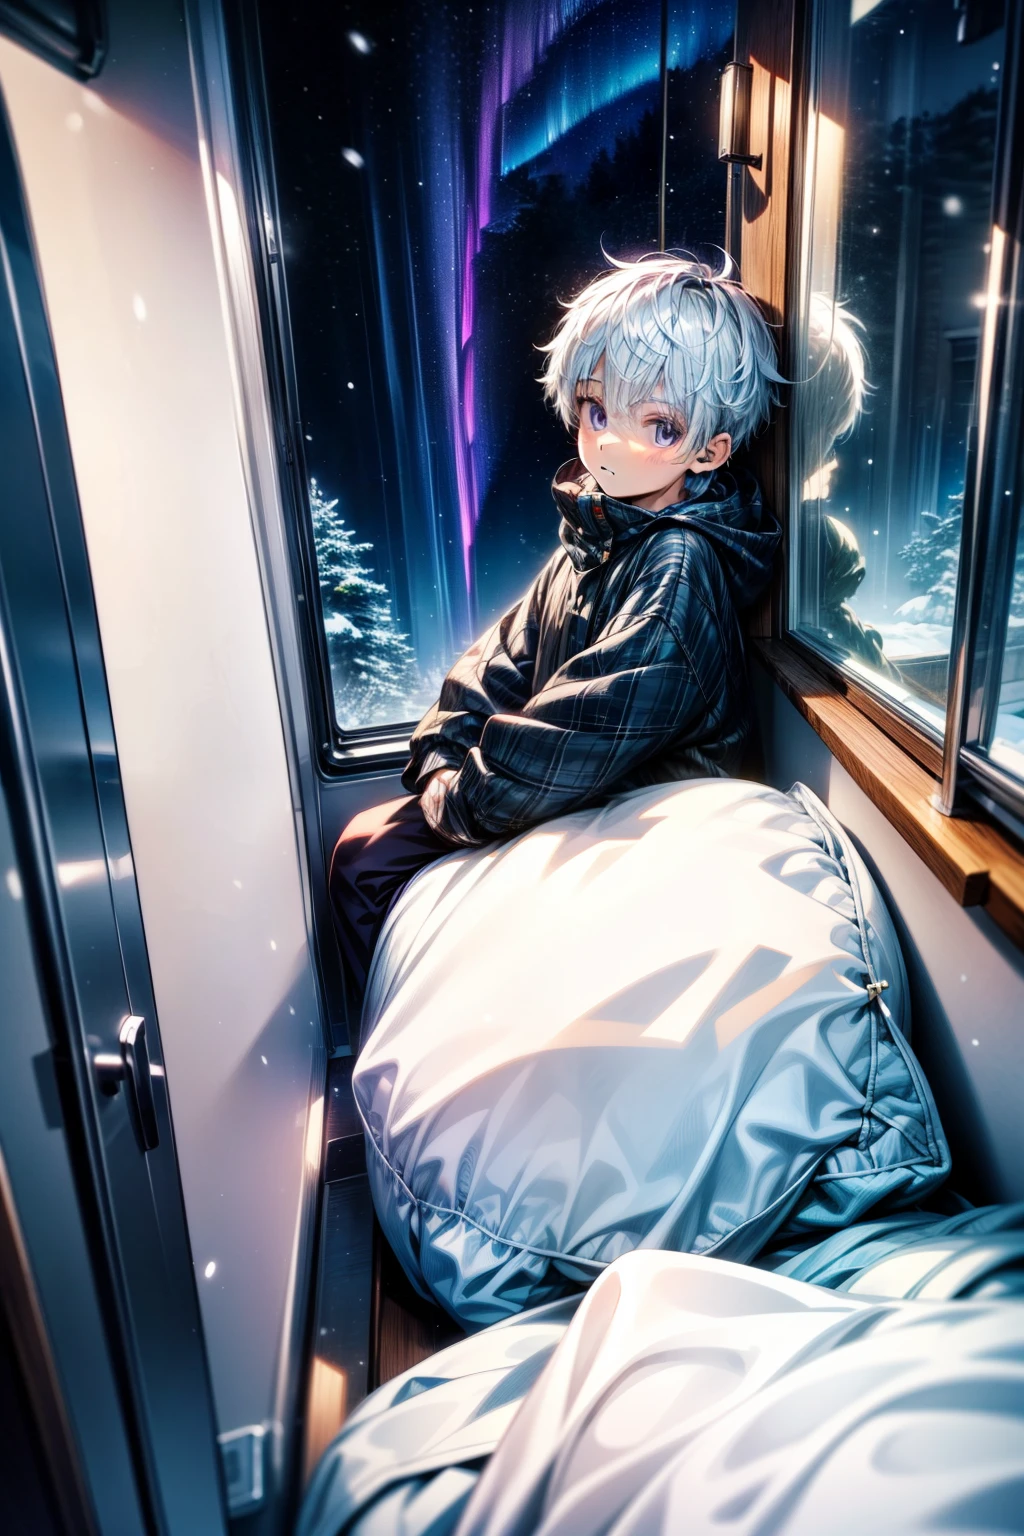 night, aurora borealis outside window, male child, 16-year-old boy, boy with white hair and purple eyes at night, winter interior, snowing outside window, downcast expression, depressed scene, cold colors, landscape image, 4k, (masterpiece:1), with white colored hair and shiny, High resolution, masterpiece, best quality, high quality, Highly detailed, 